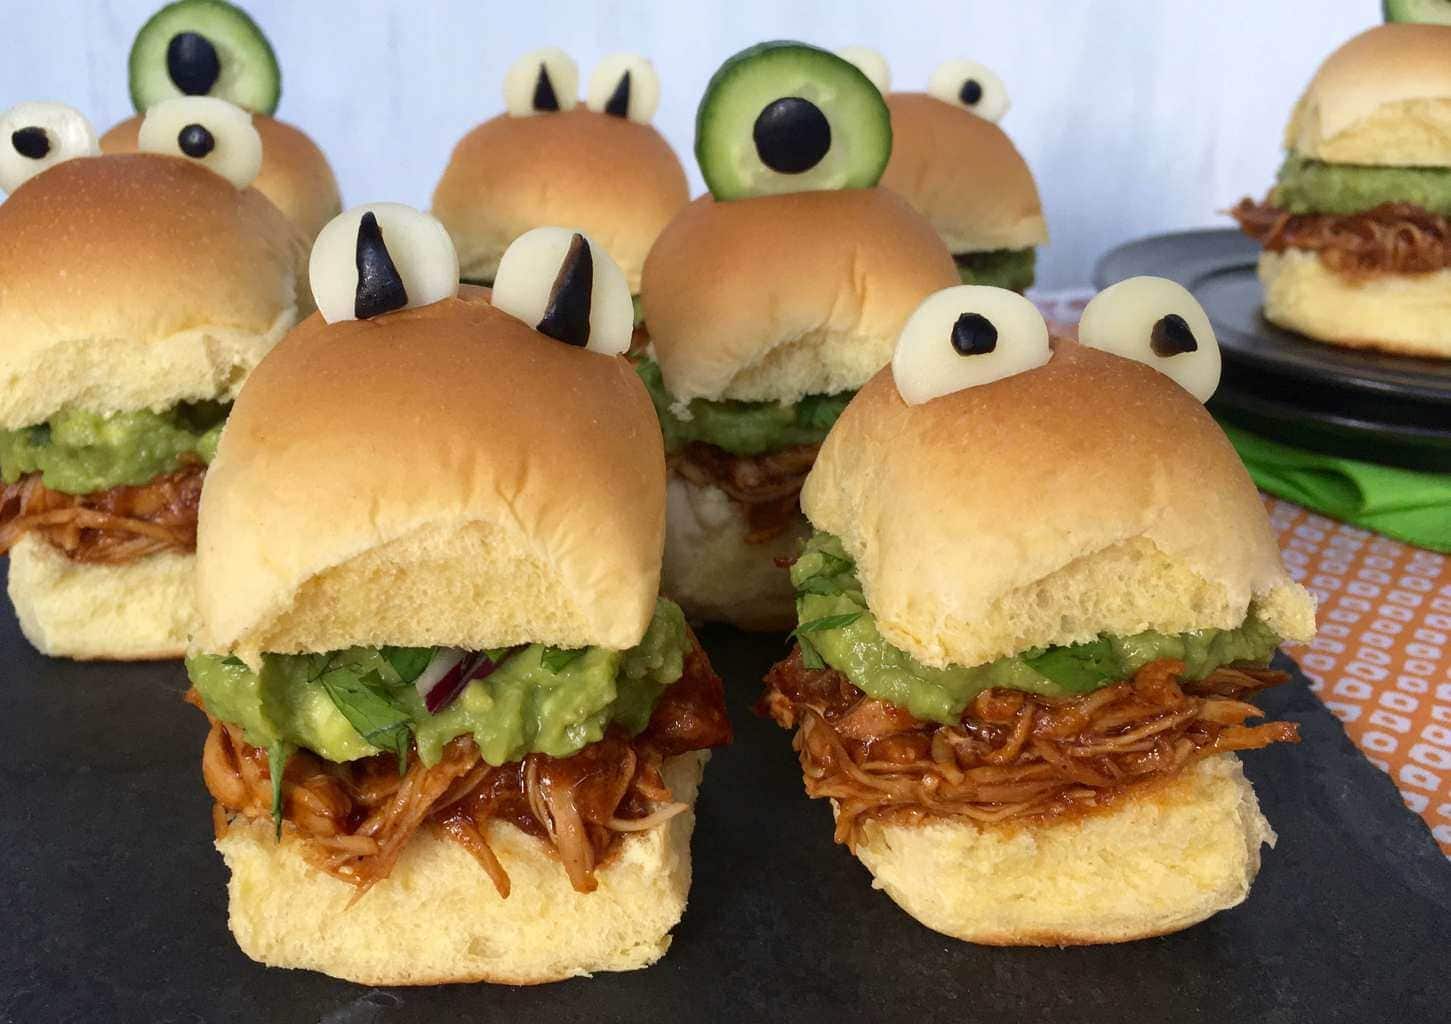 sliders with chicken and some eyeballs made on top